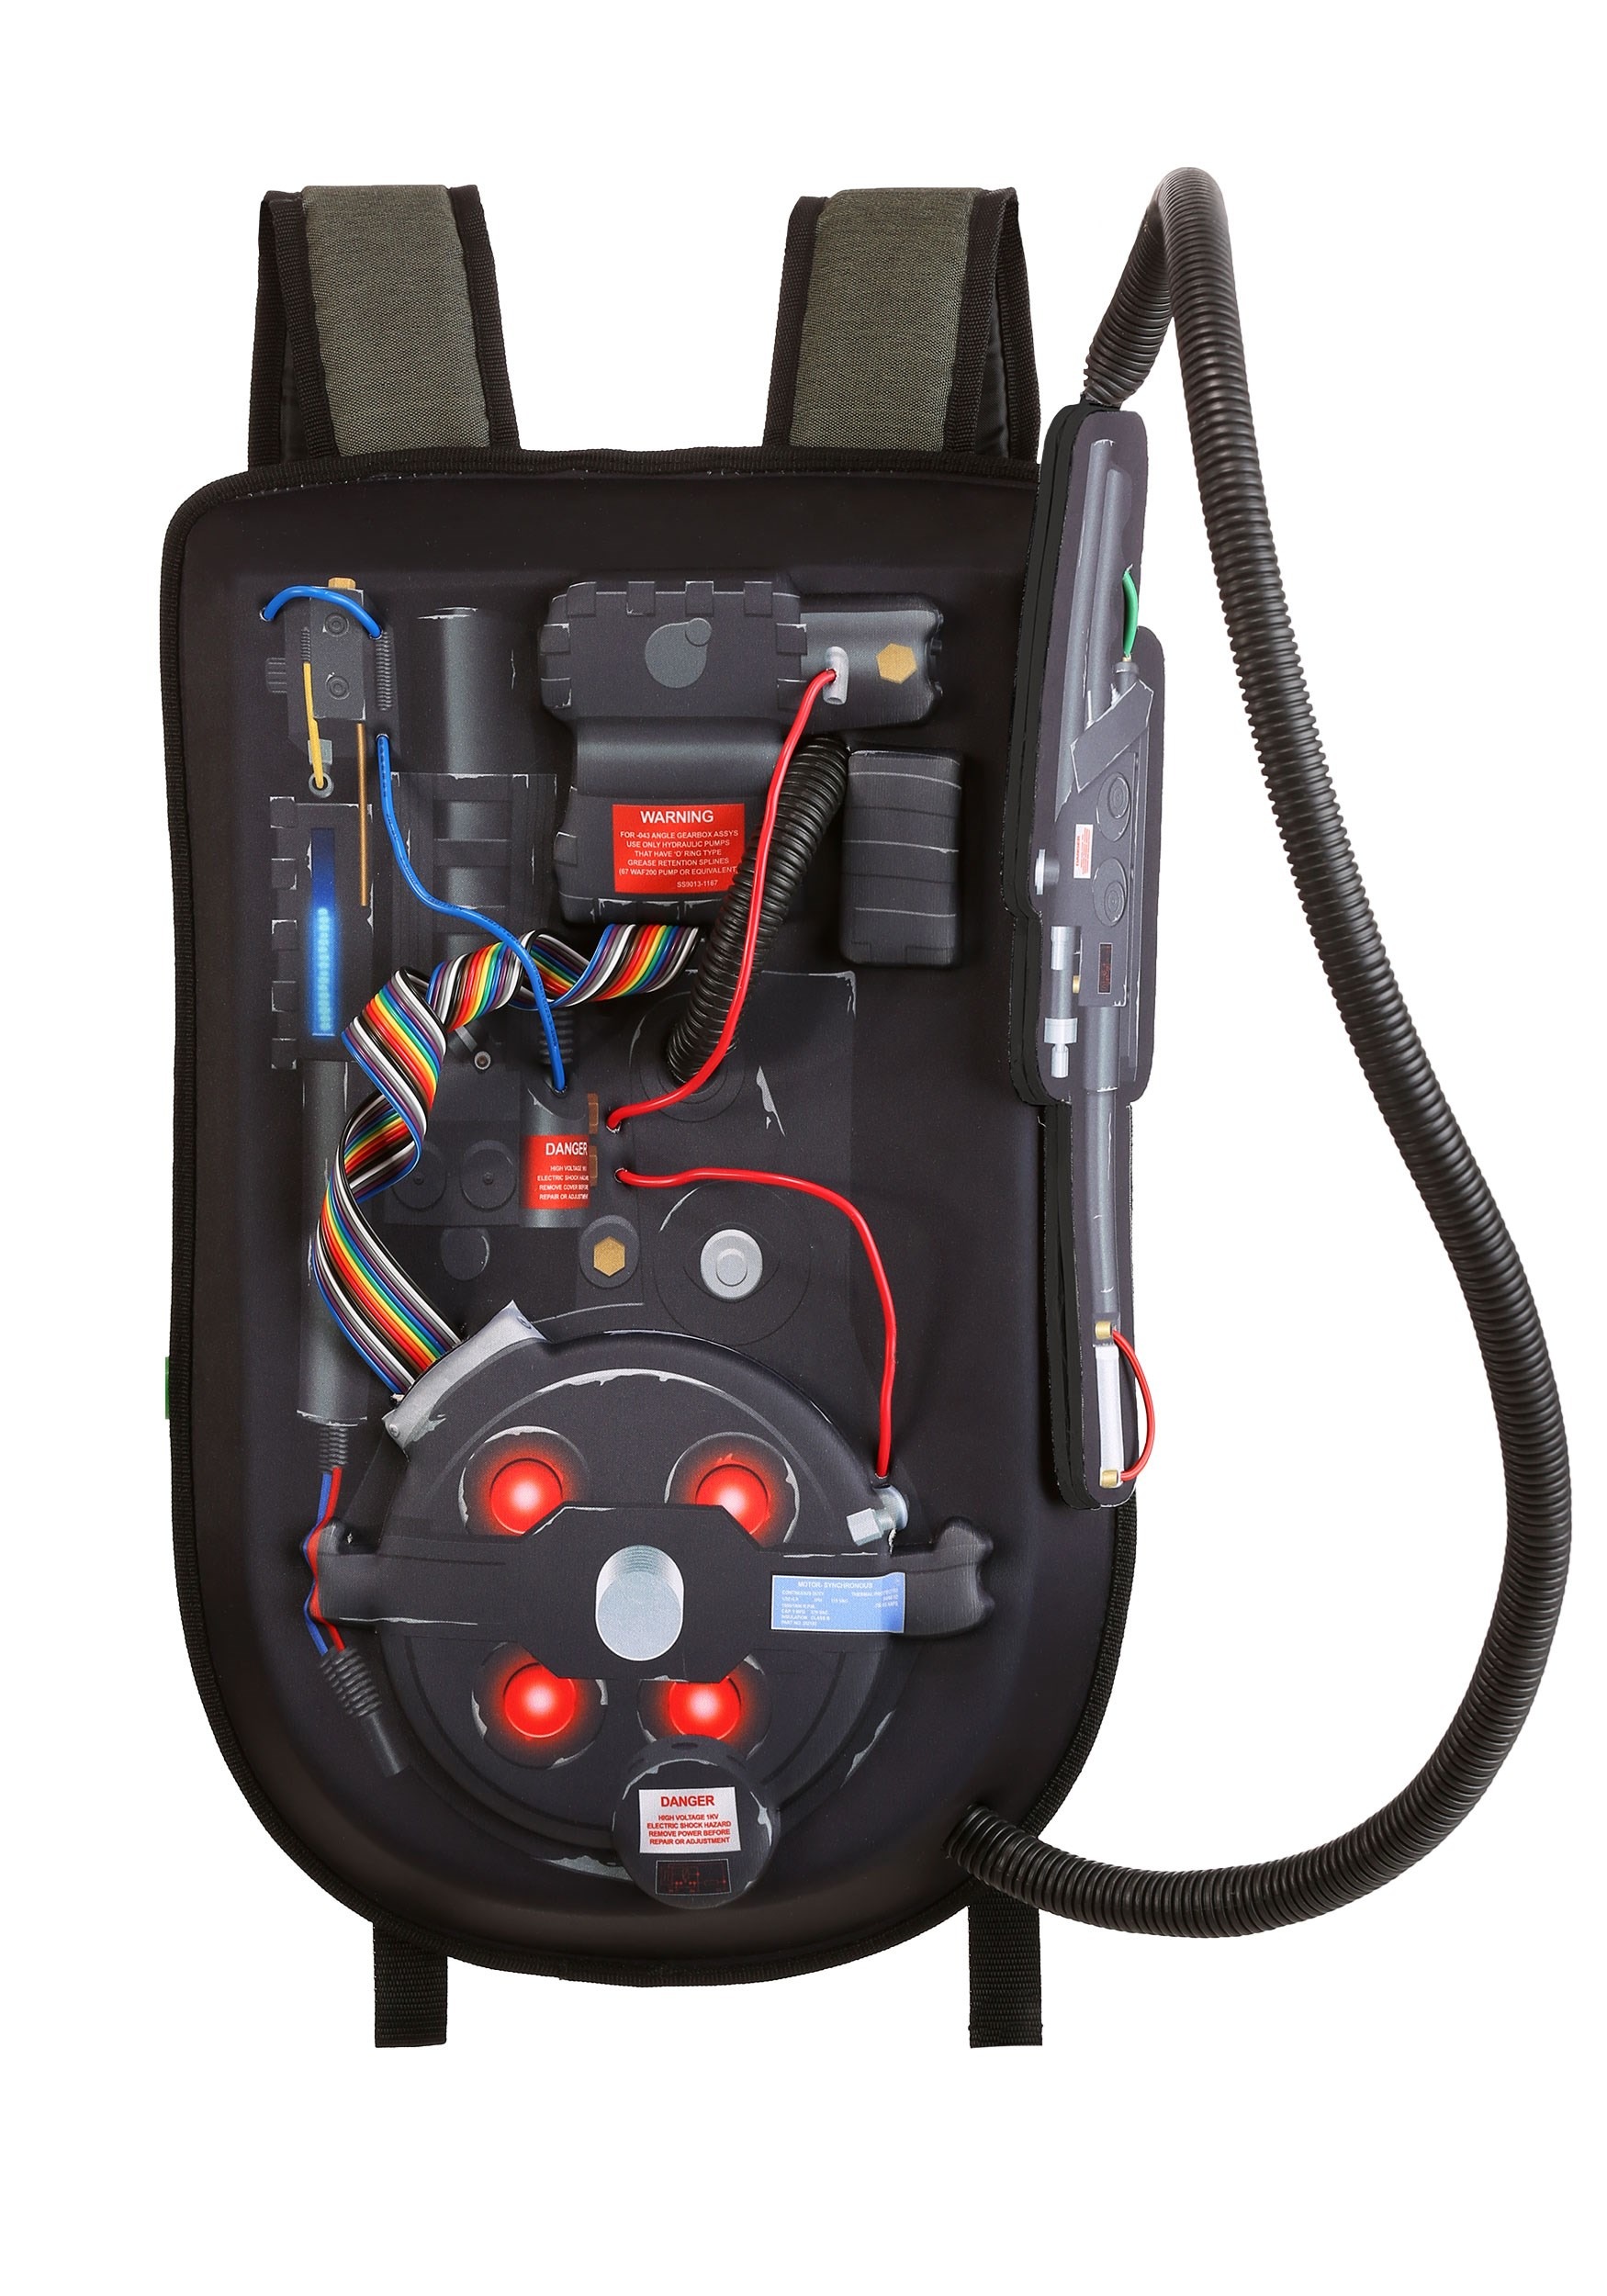 Ghostbusters Proton Pack w/ Wand Costume Backpack